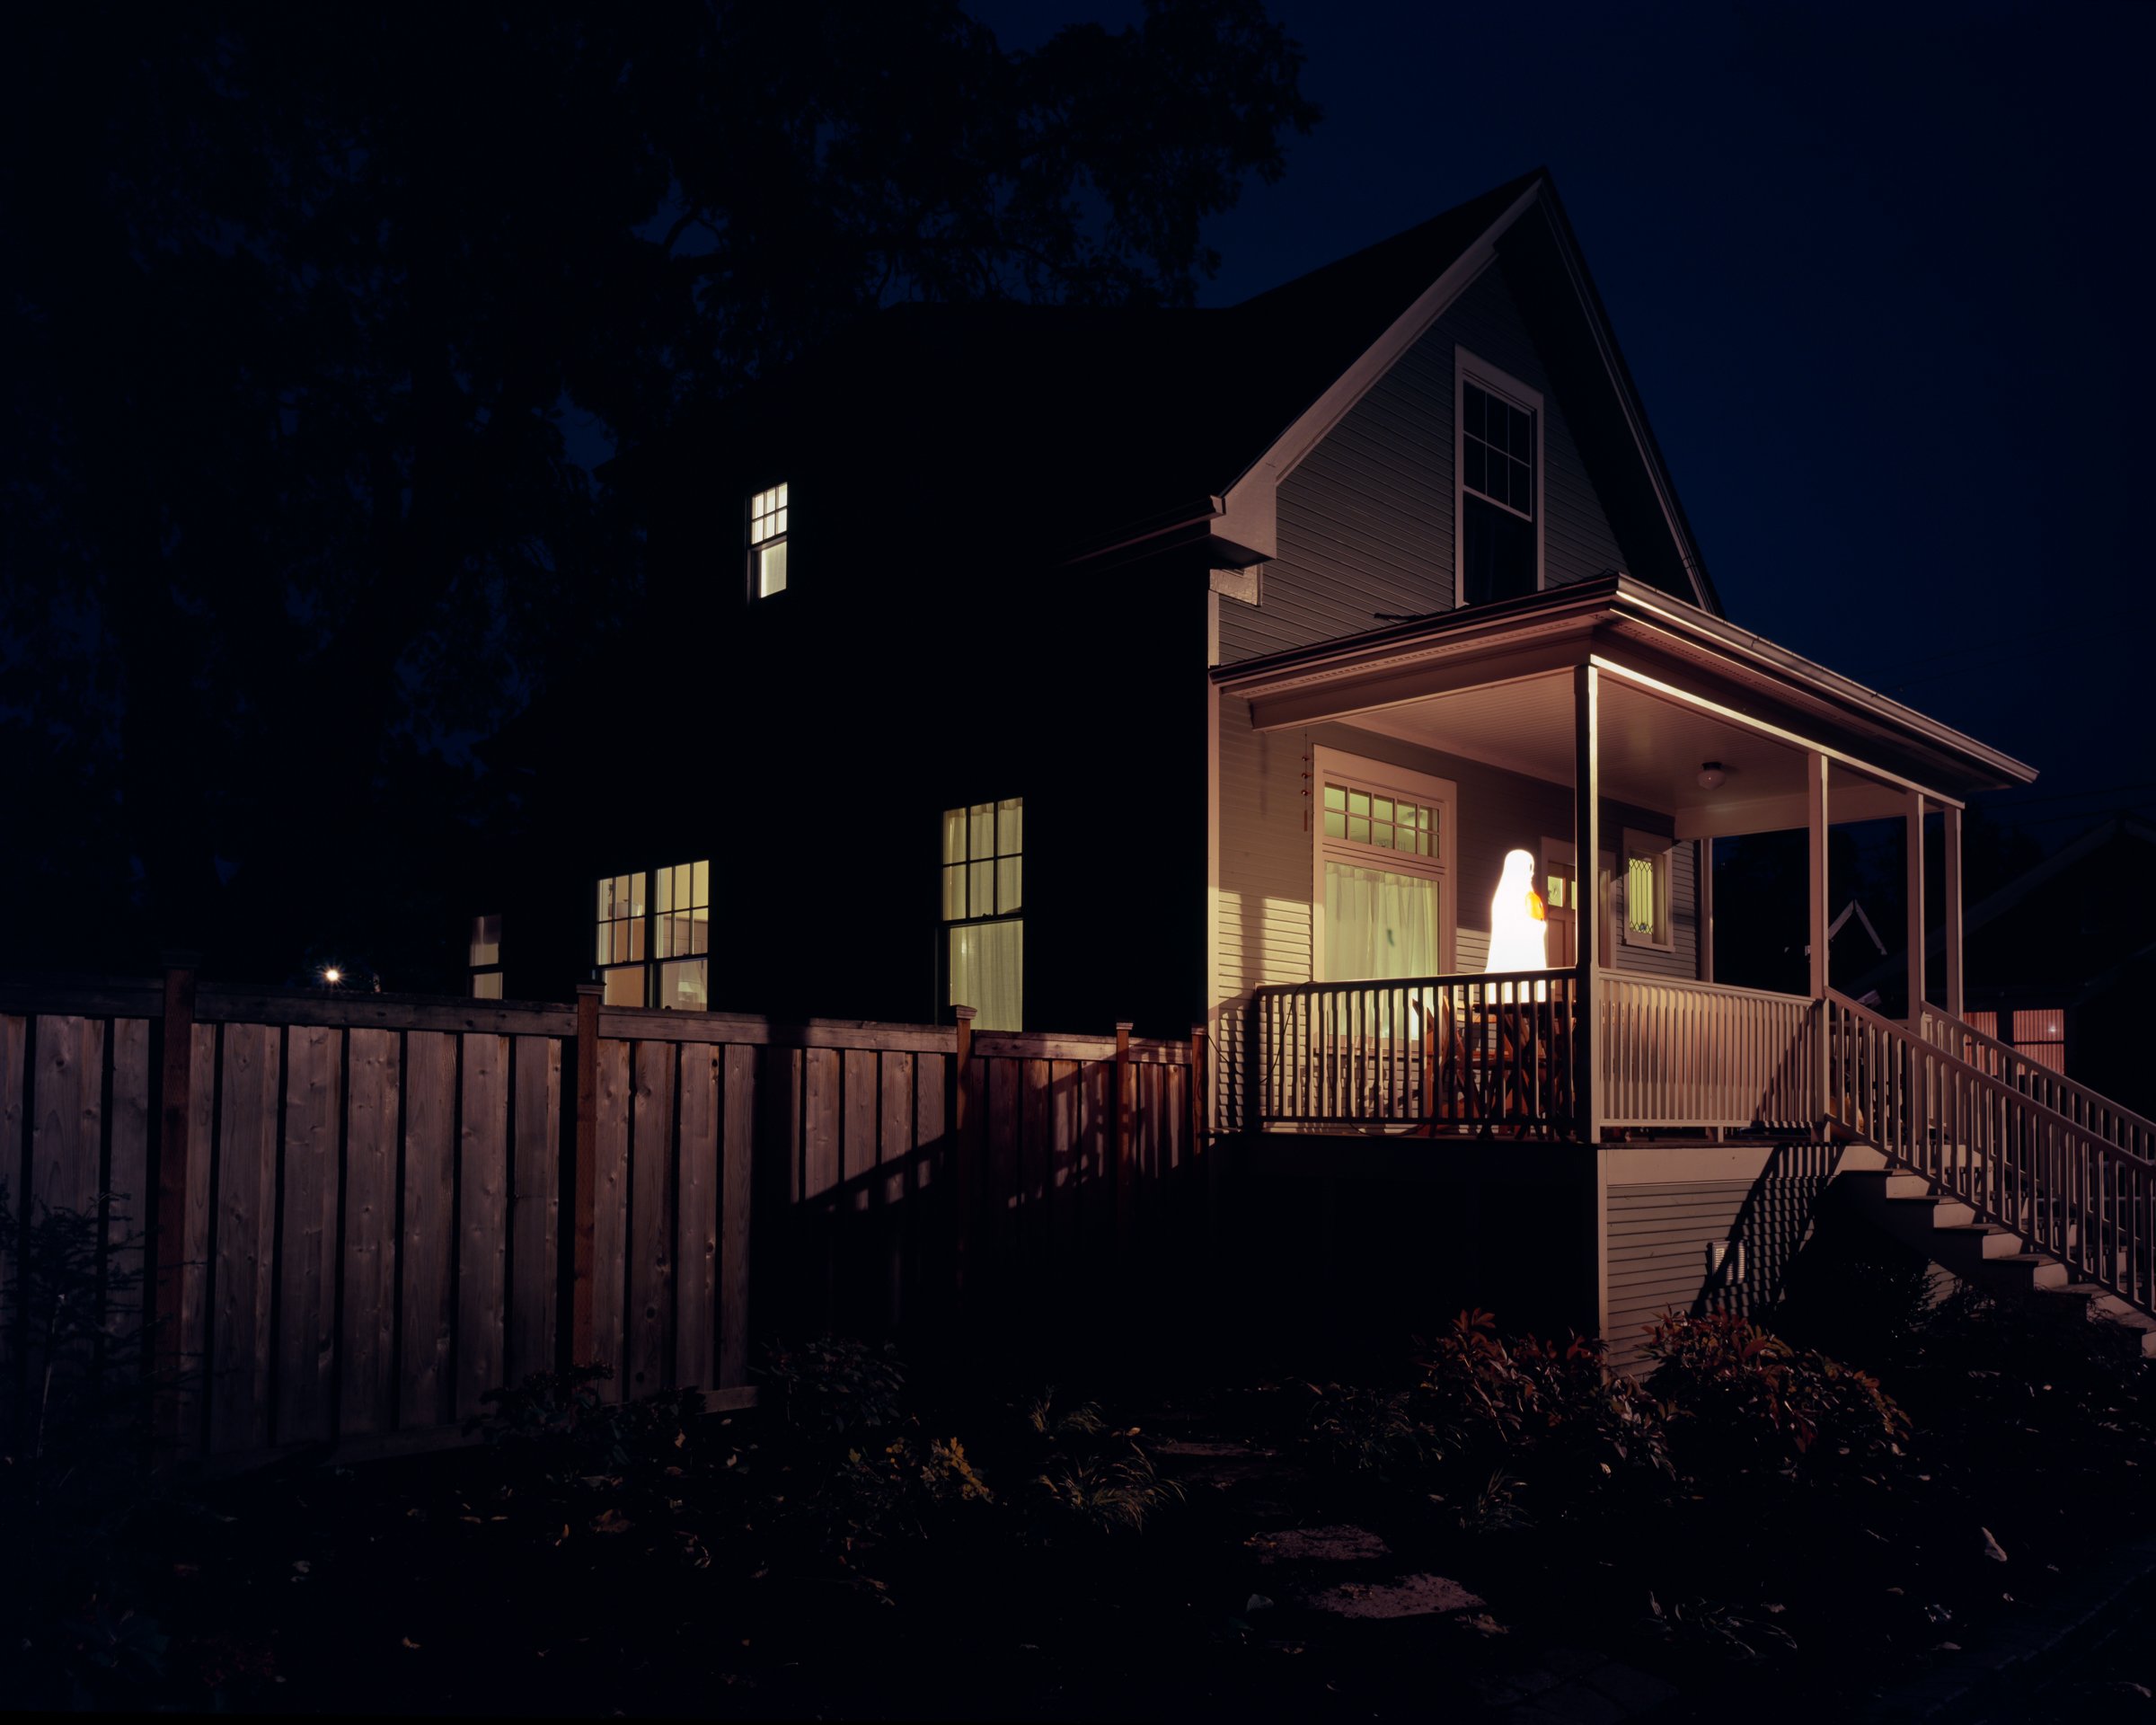 Wallpaper, night, home, house, sky, light, architecture, darkness, residential area, phenomenon, cottage, evening, building, facade, shed, landscape lighting, midnight 2400x1920